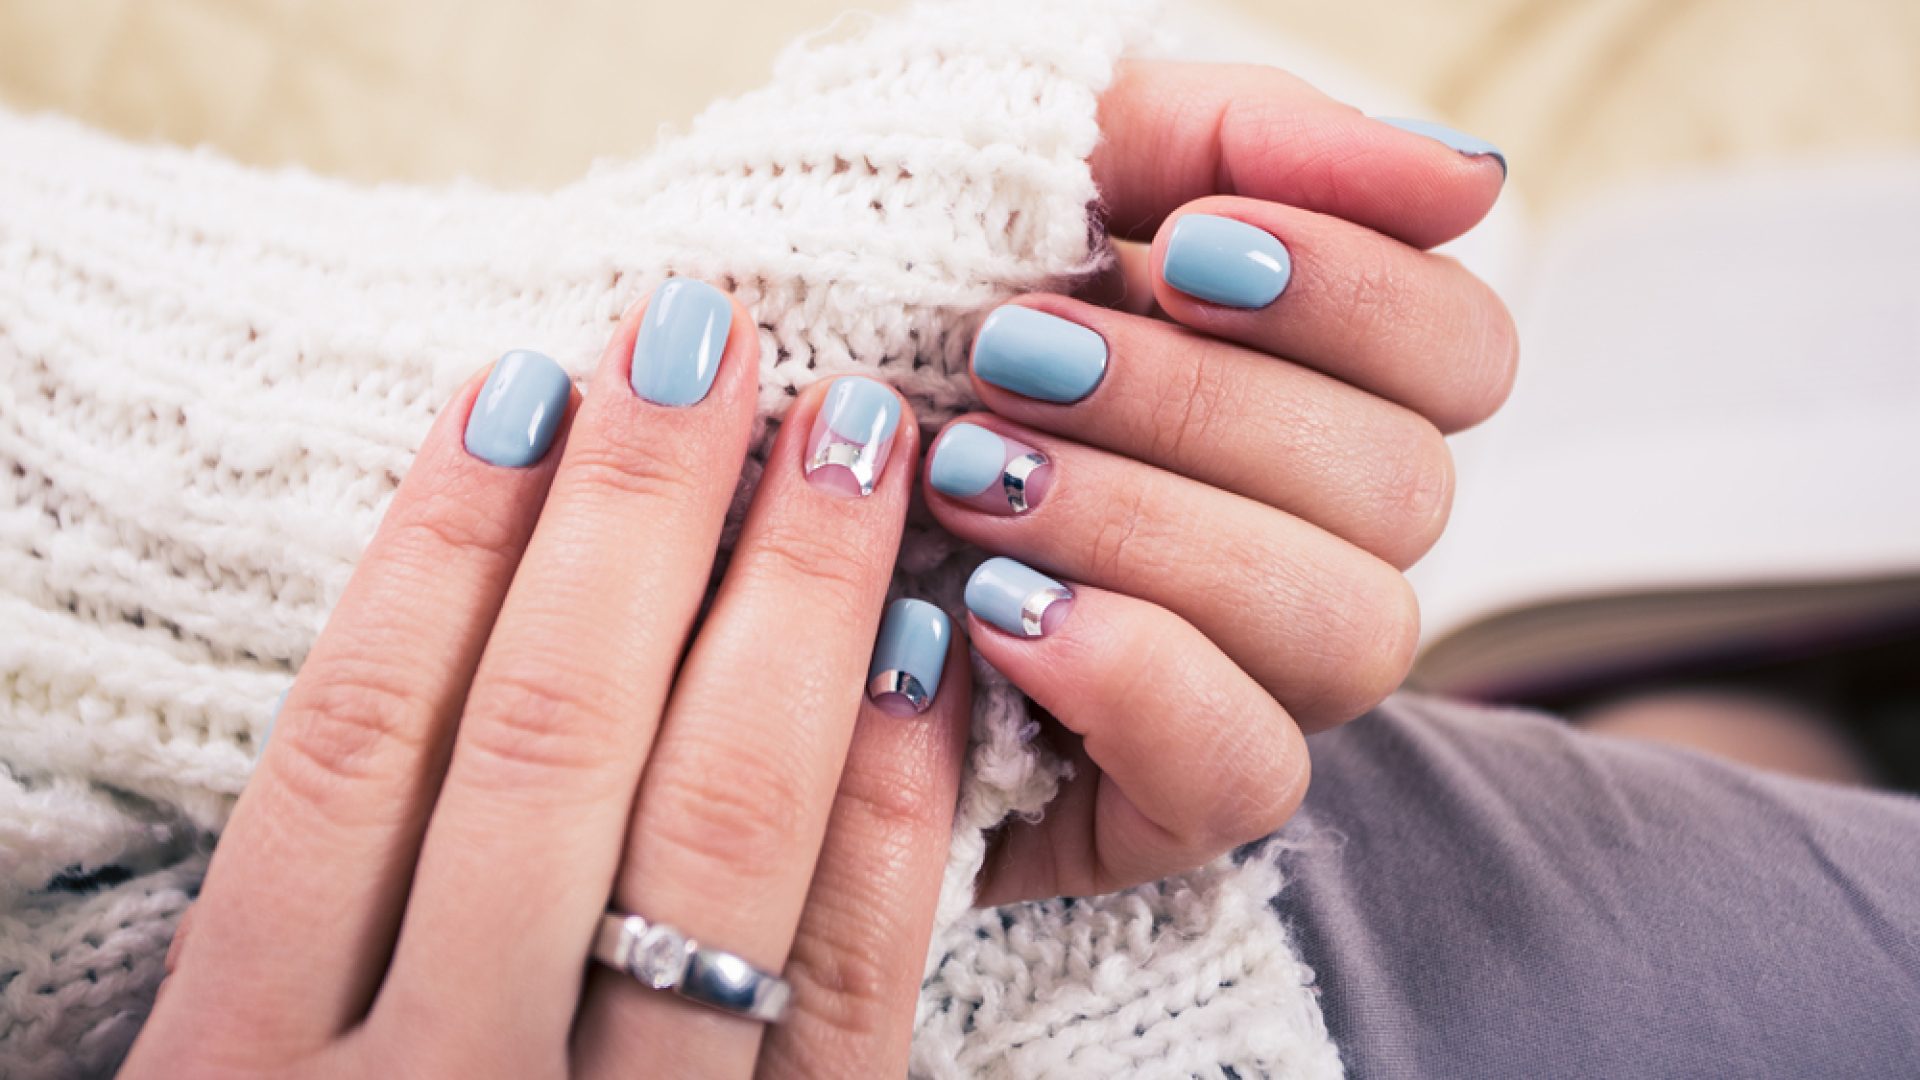 Removing Gel Manicures At Home Is Easy And Cheap — Watch These Youtube Tutorials That Will 0207